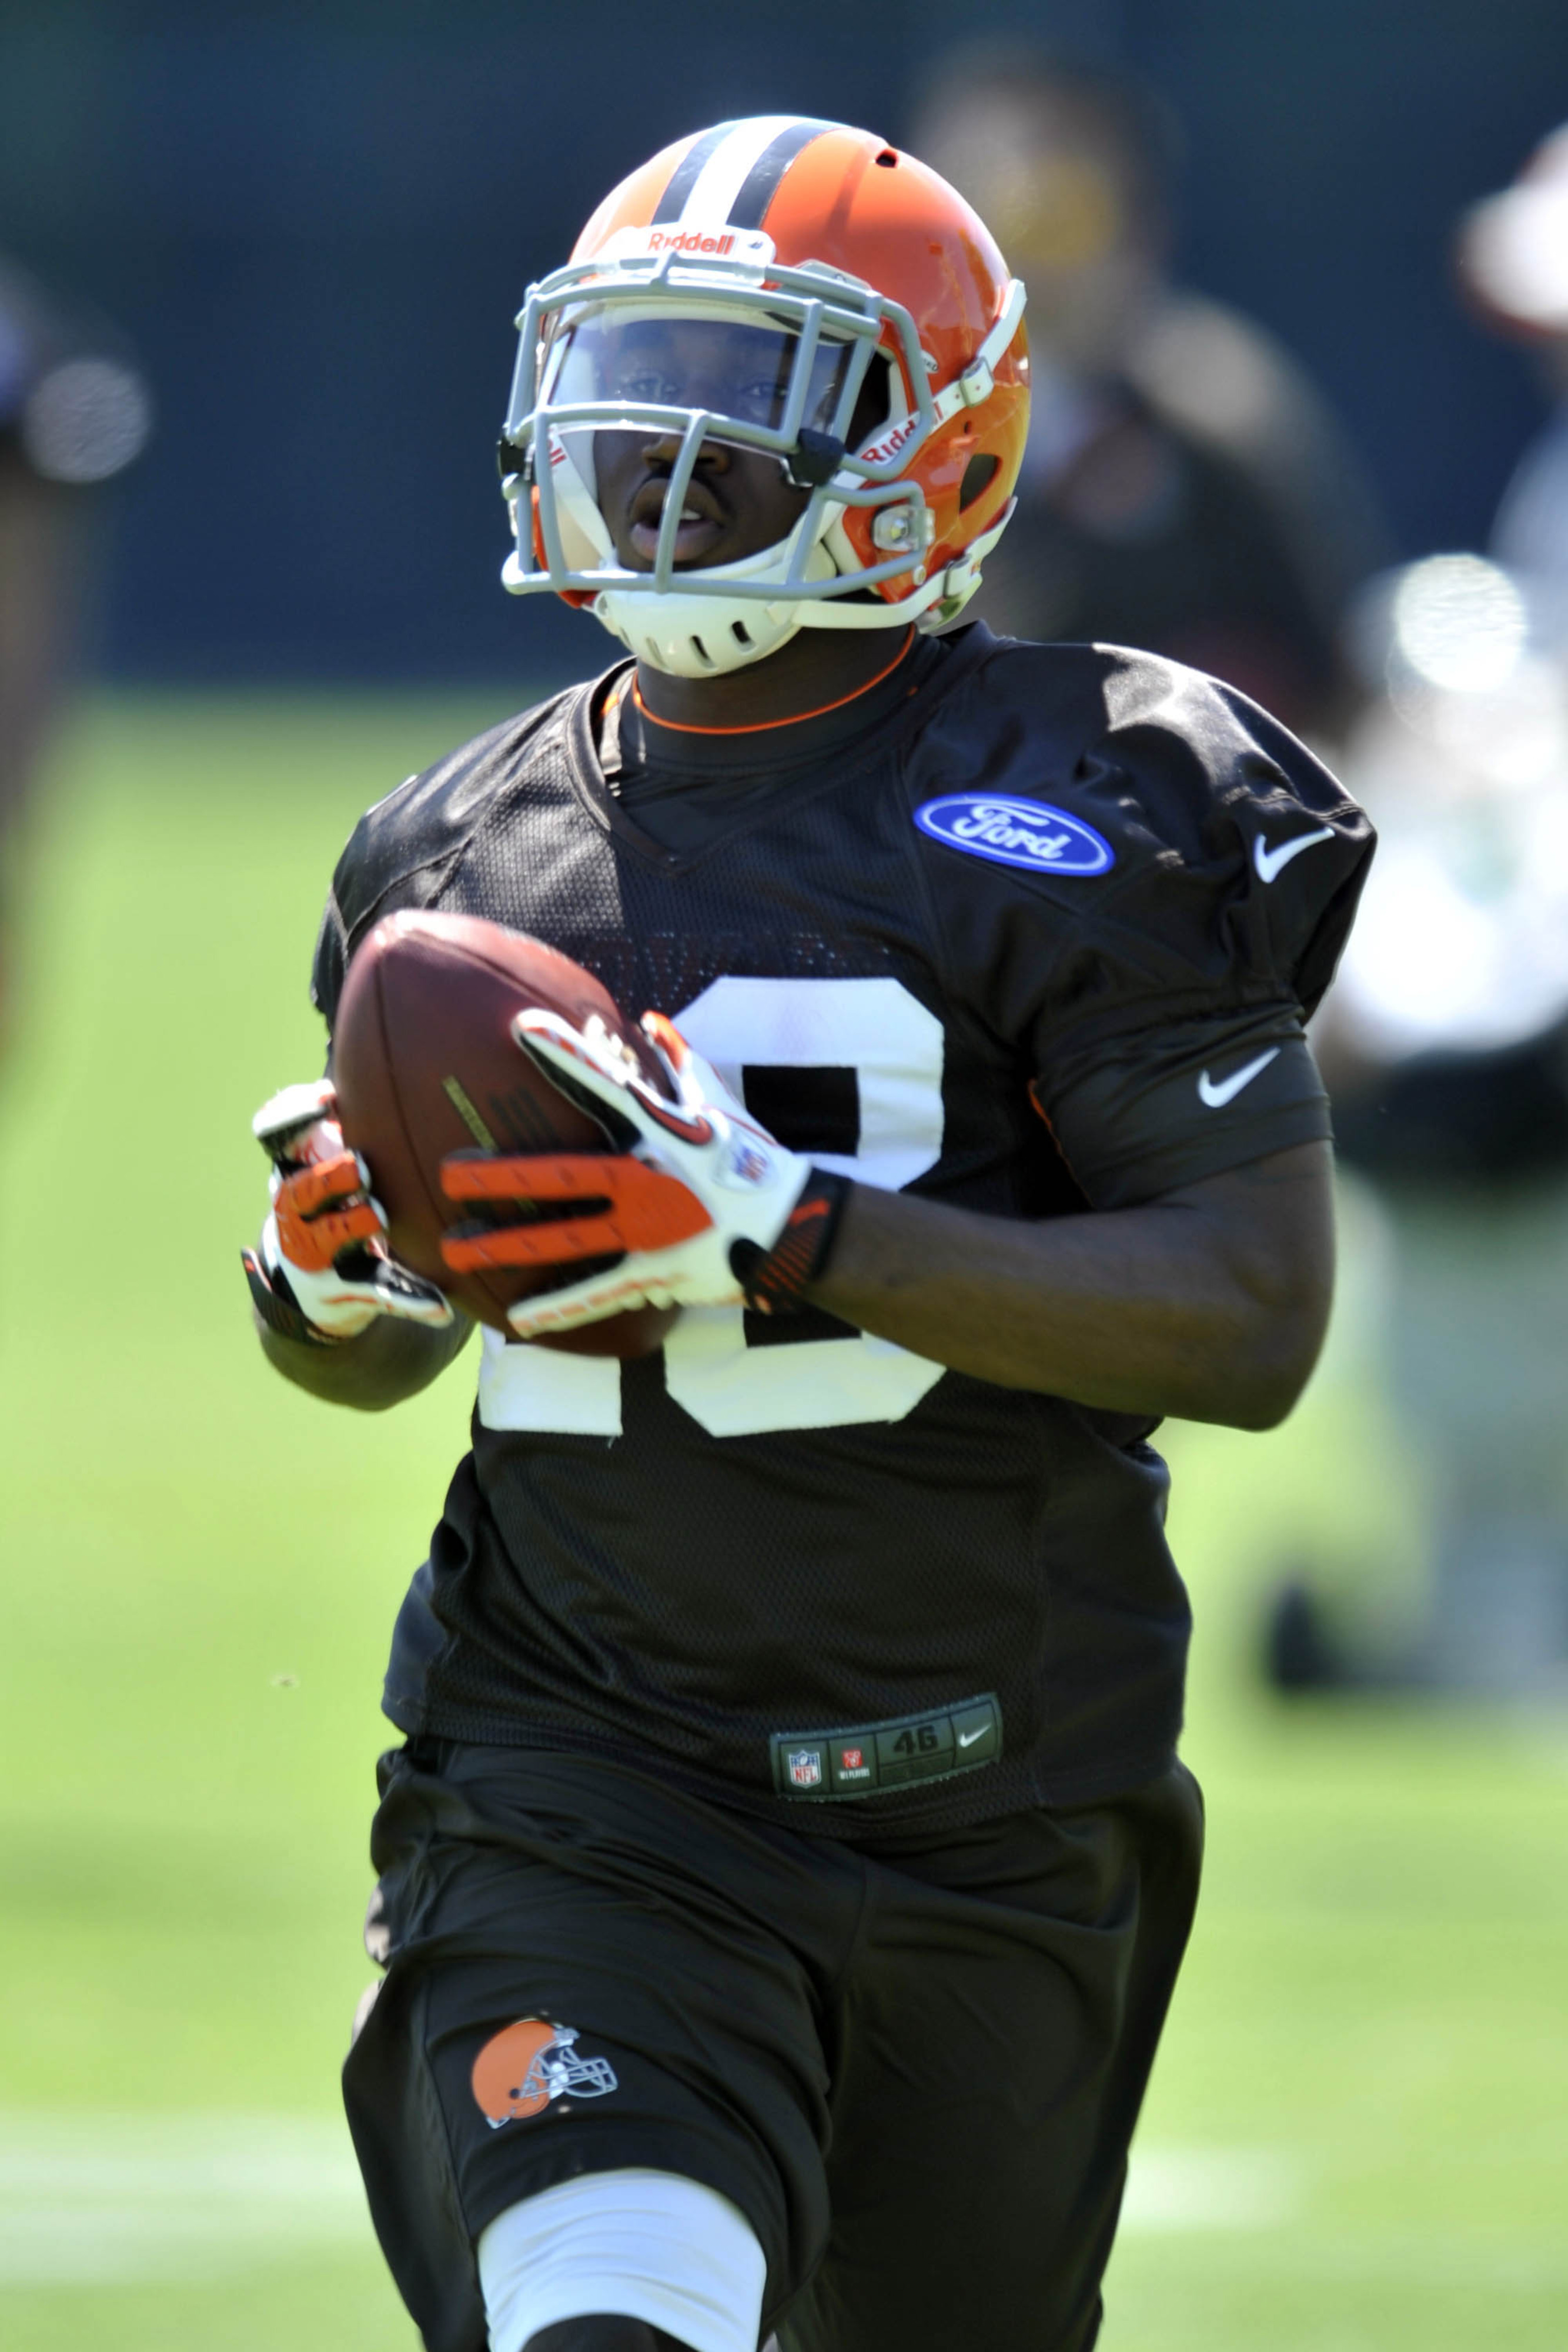 New Browns RB Dion Lewis was acquired from the Philadelphia Eagles.